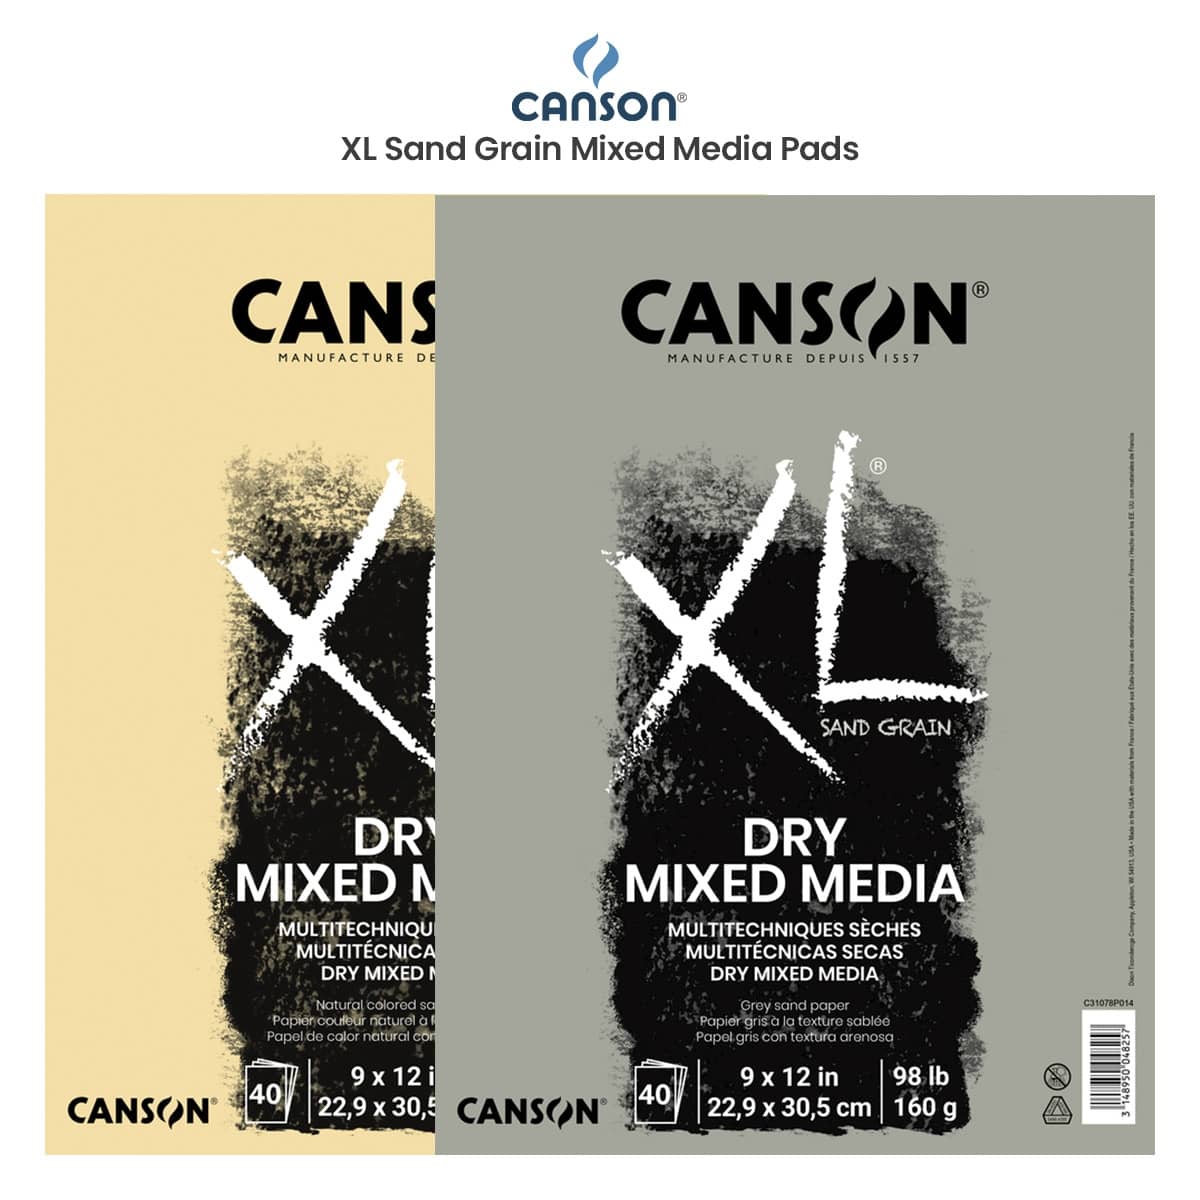 Canson WATERCOLOR PAPER (40% EXTRA OFFER) TWIN PACKS MADE IN FRANCE Sketch  Pad Price in India - Buy Canson WATERCOLOR PAPER (40% EXTRA OFFER) TWIN  PACKS MADE IN FRANCE Sketch Pad online